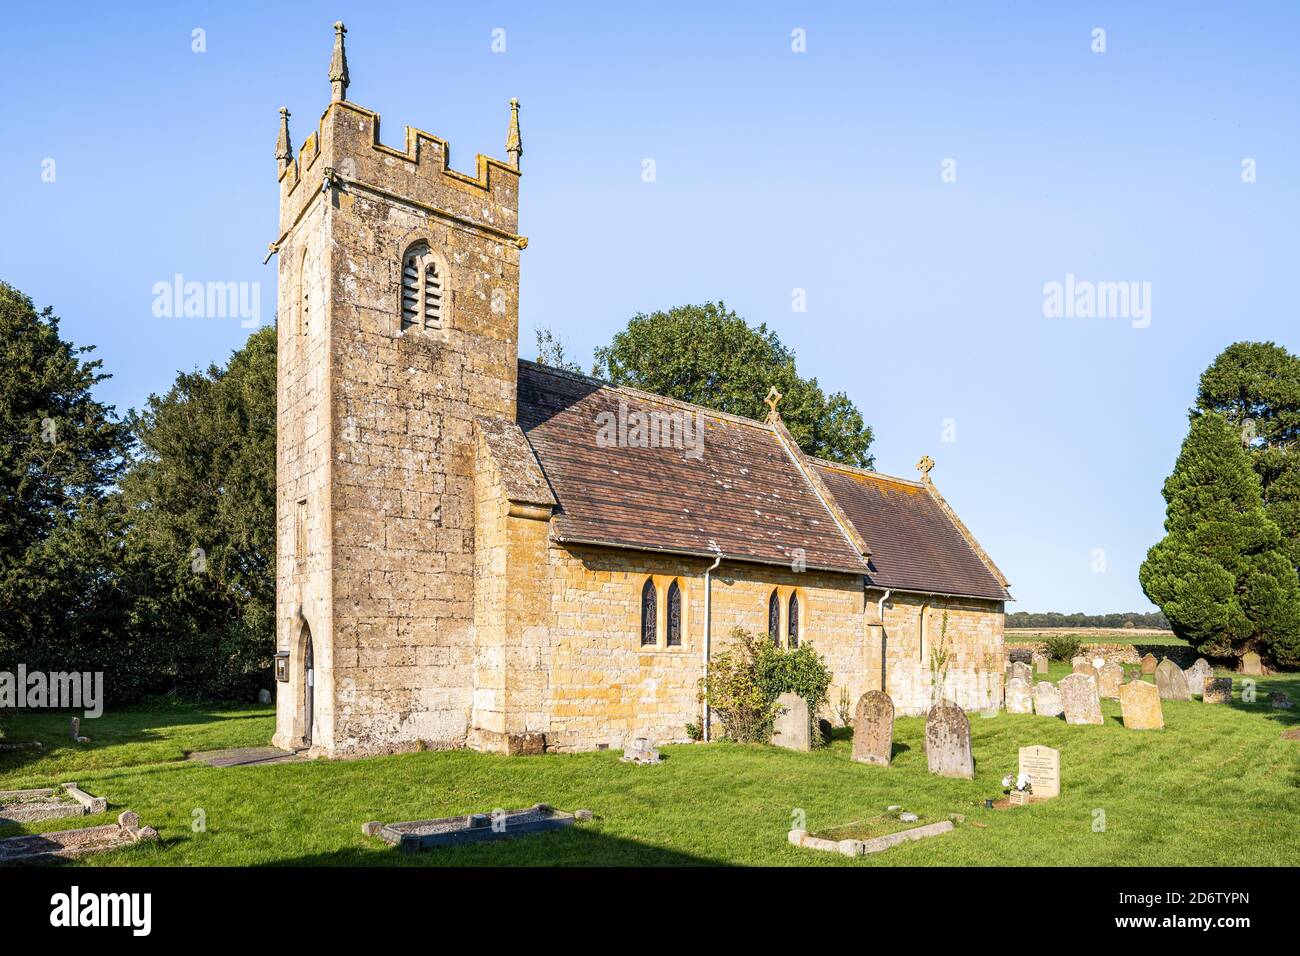 Evening light on the church of St James in the Cotswold village of Cutsdean, Gloucestershire UK - The tower is probably 14th century. Stock Photo